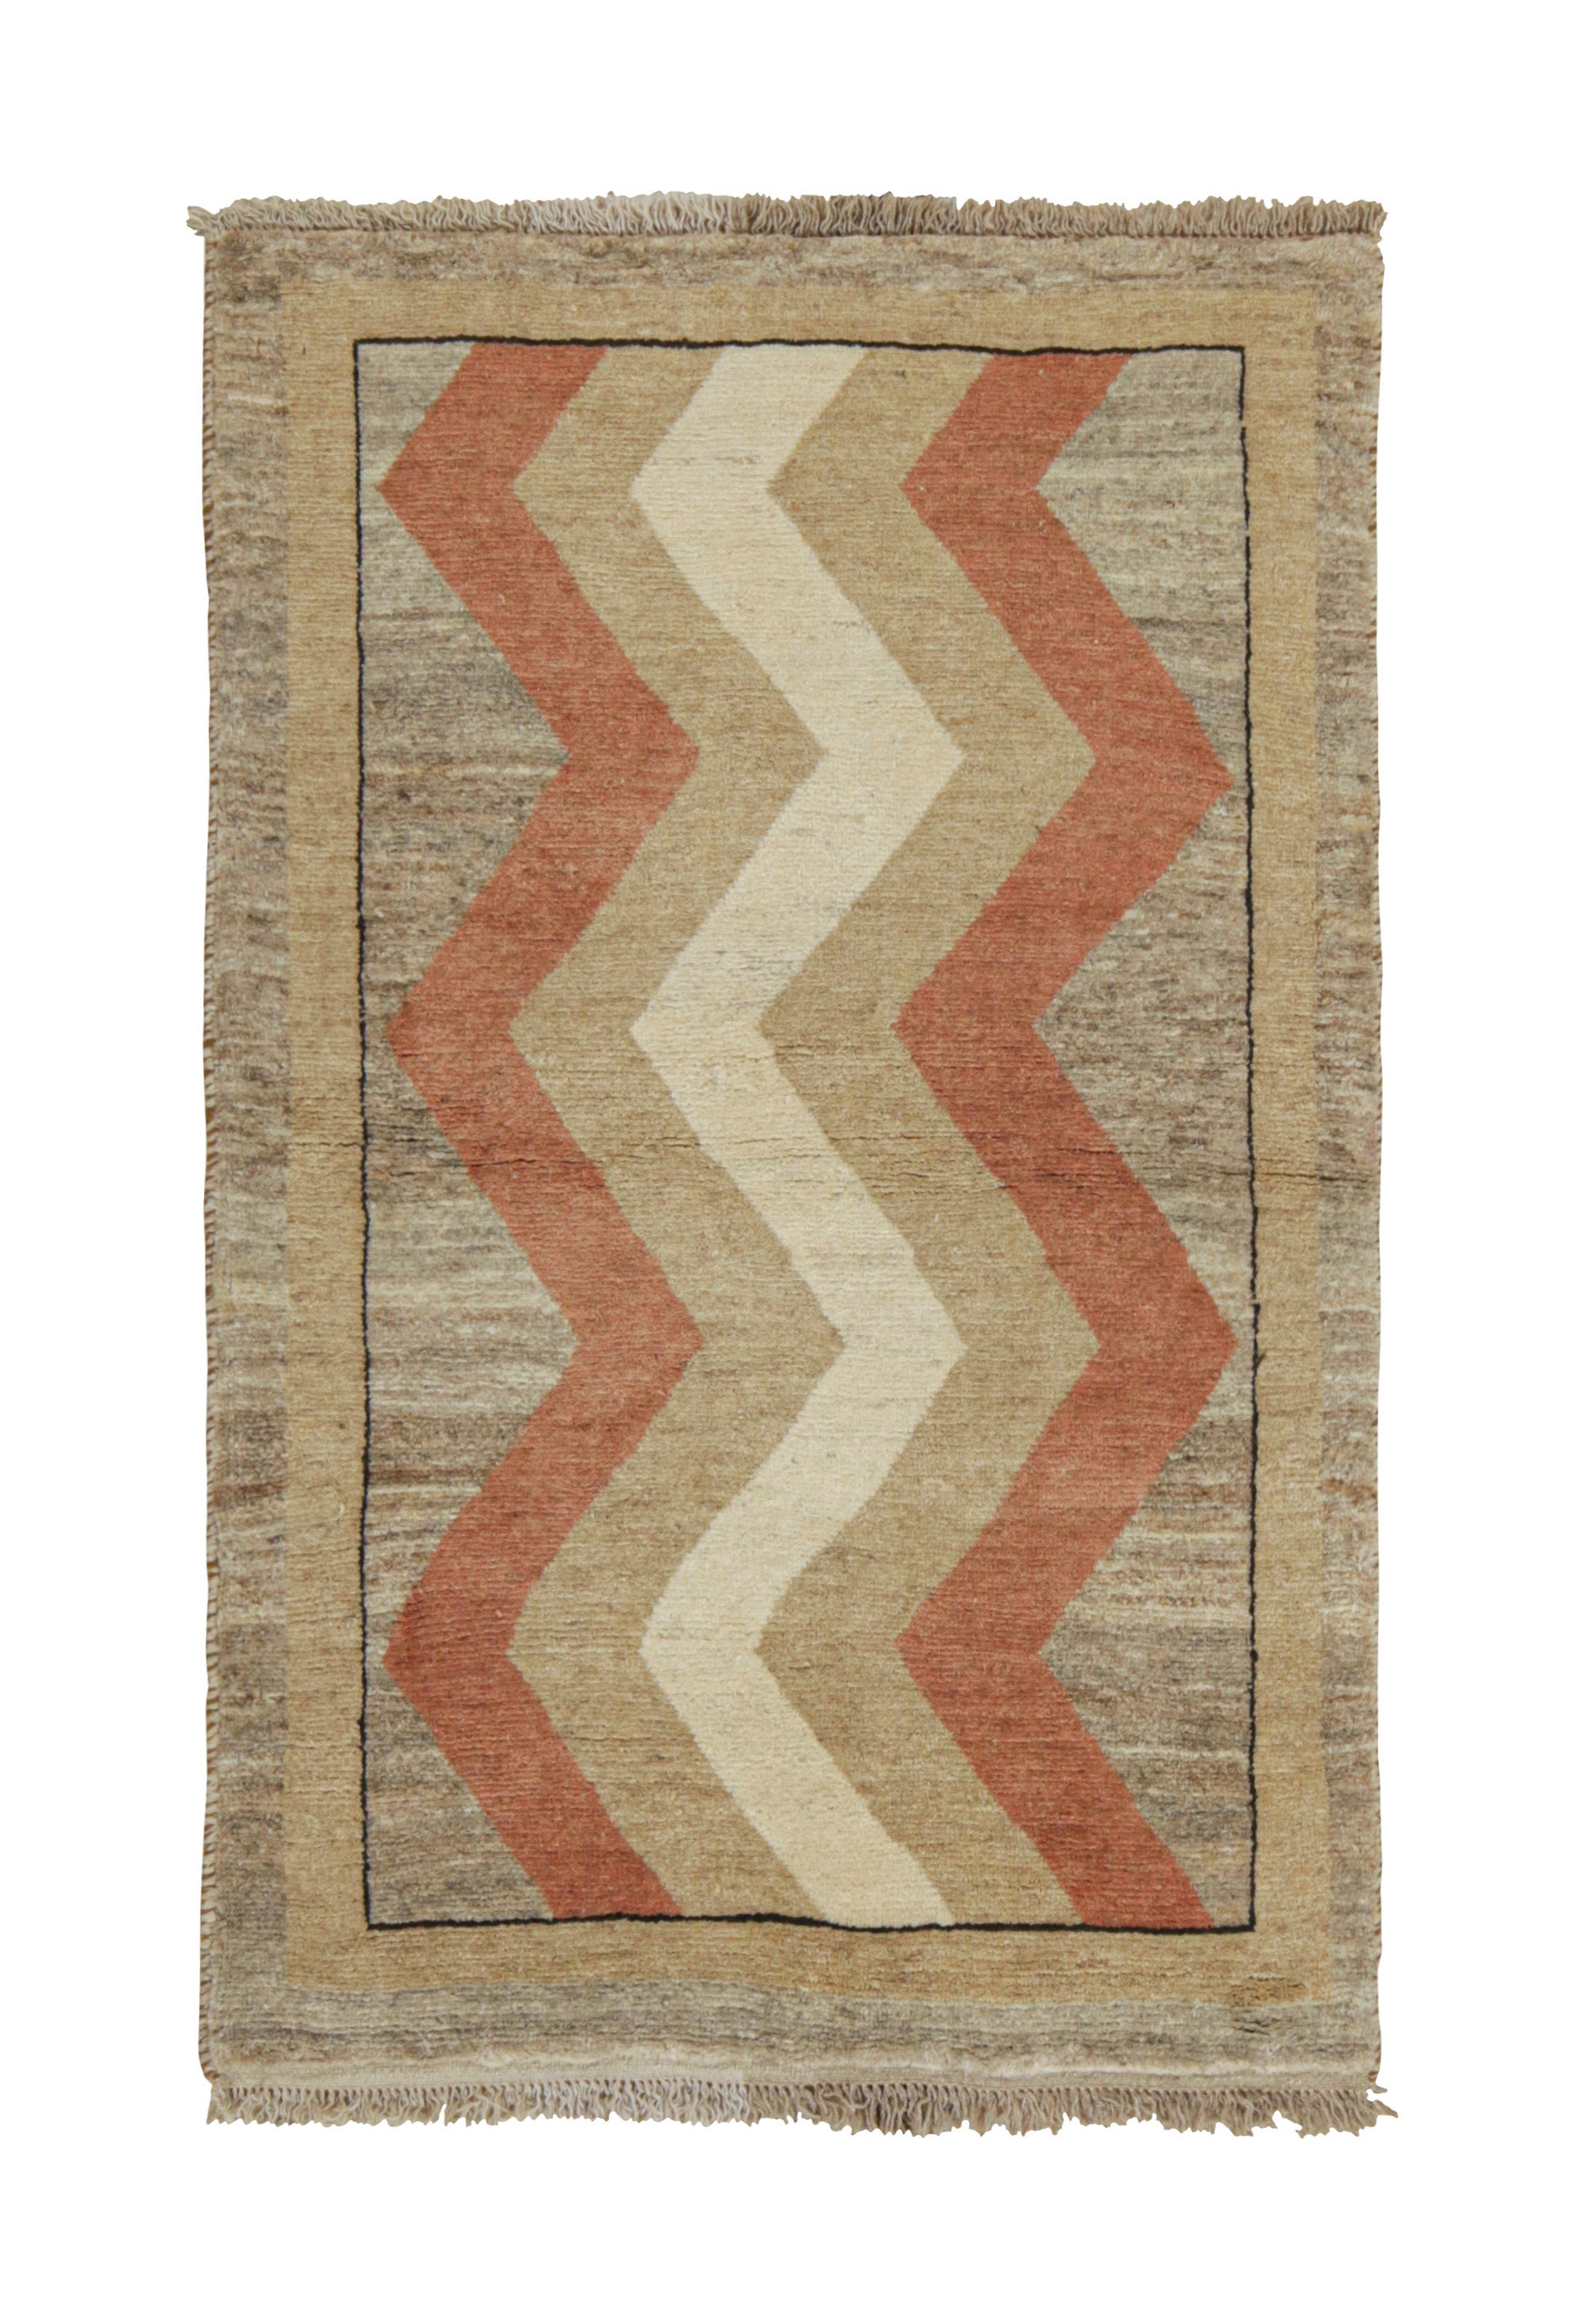 Vintage Gabbeh Rug in Beige-Brown and Red Chevron Patterns by Rug & Kilim For Sale